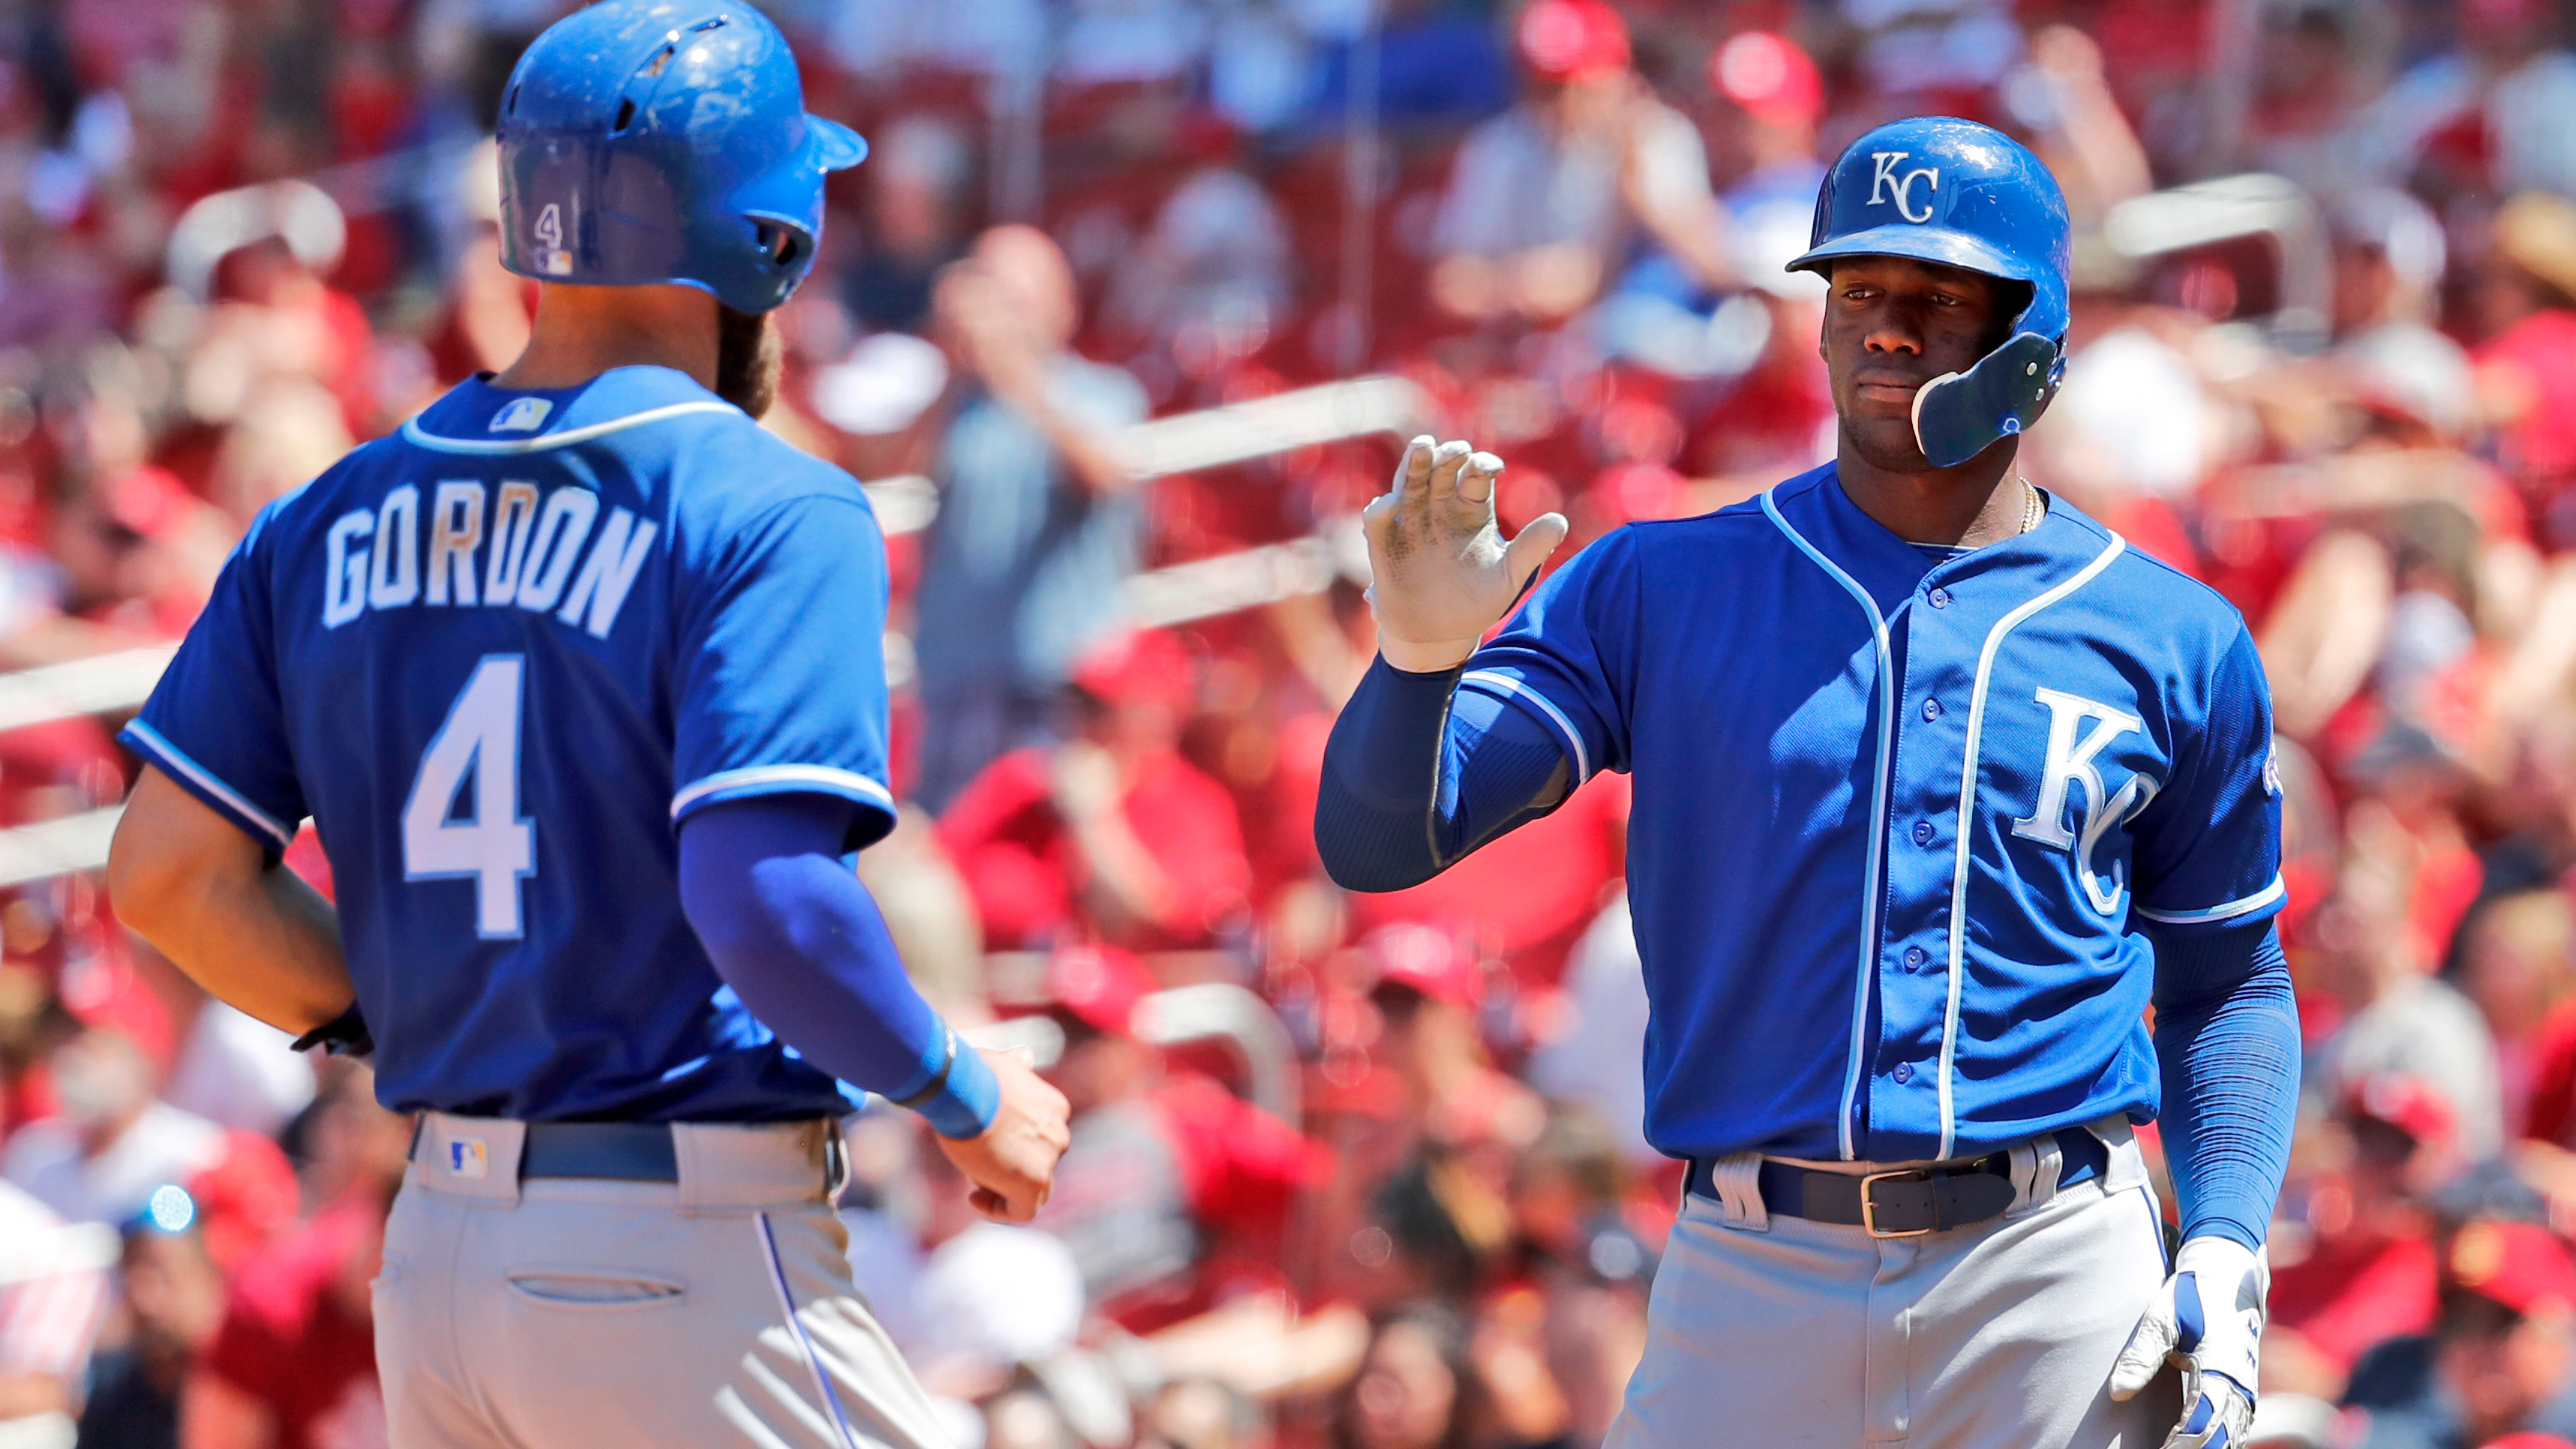 Royals rally in 10th to beat Cards 5-2, win their second series